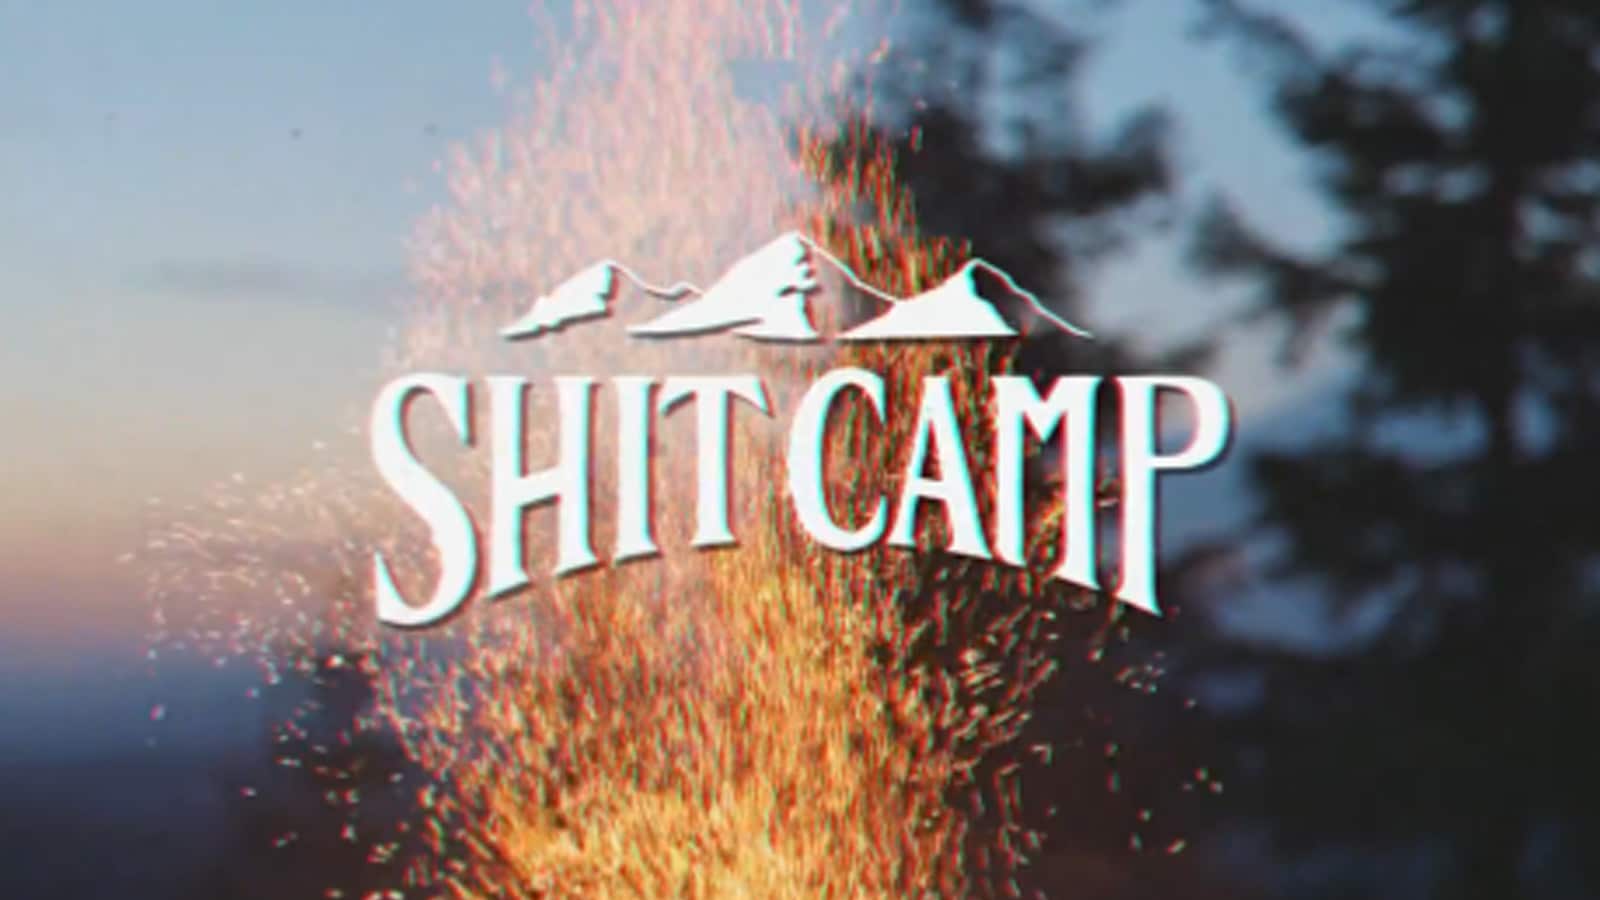 Shitcamp 2022 Overview: Event that Gathered the Top Streamers from